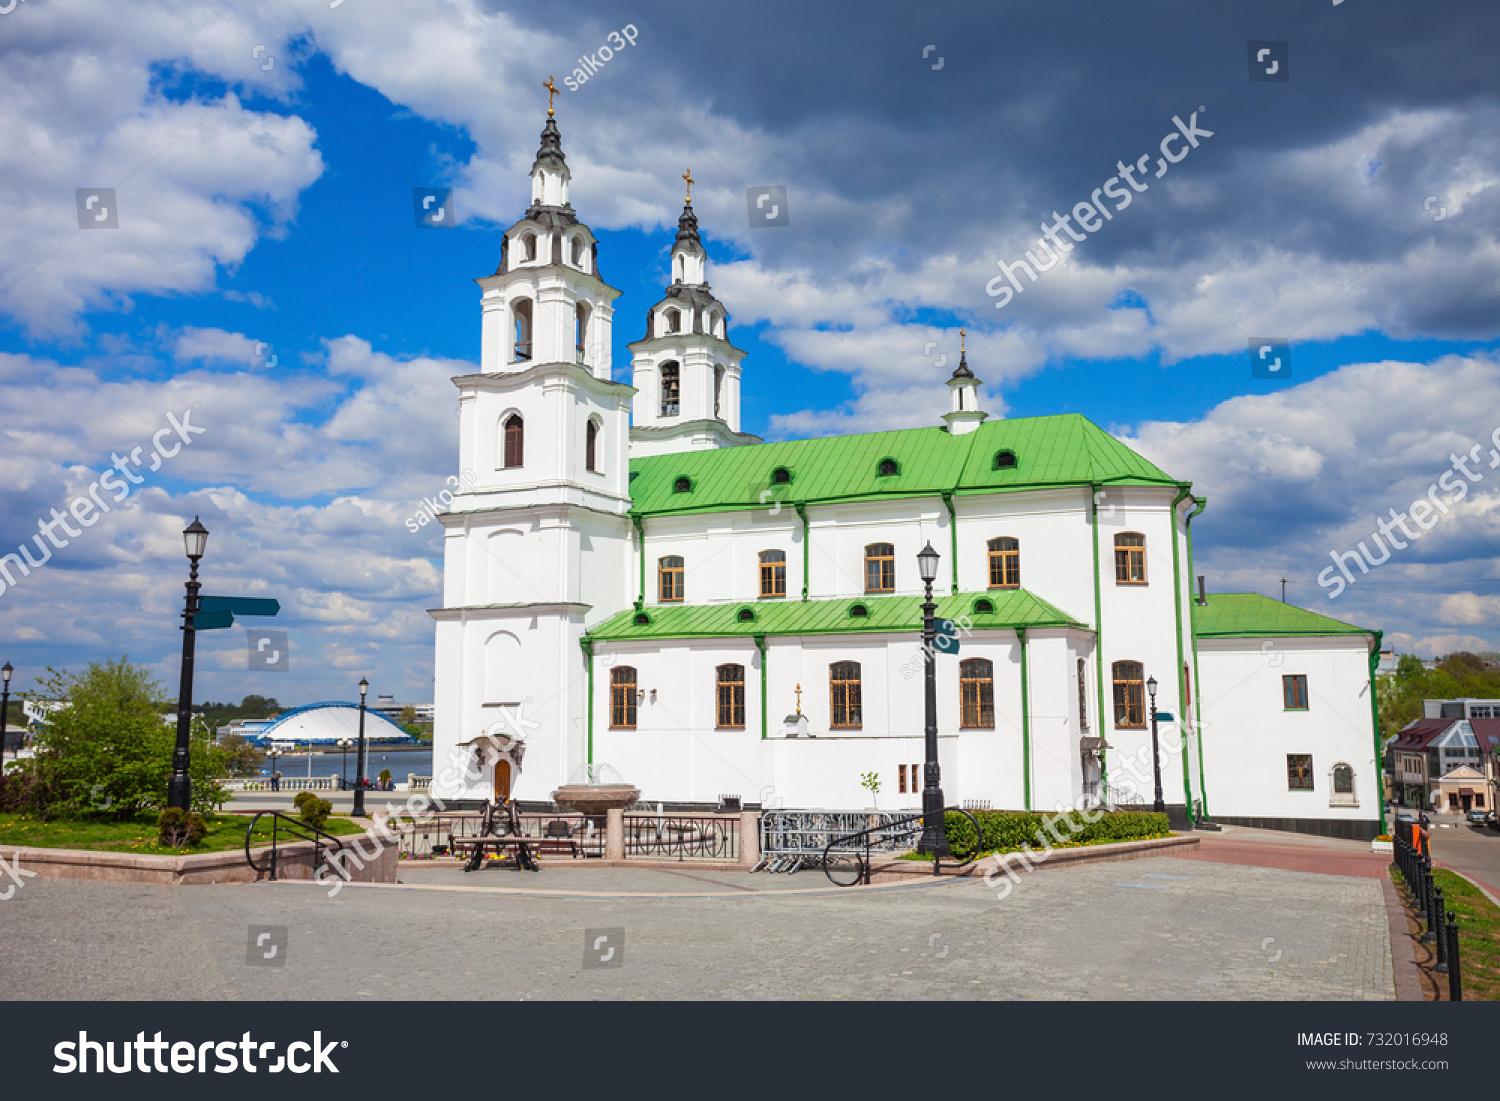 The Holy Spirit Cathedral is the central cathedral of the Belarusian Orthodox Church, and dedicated to the Holy Spirit. Holy Spirit Cathedral is located in Minsk, Belarus. #732016948